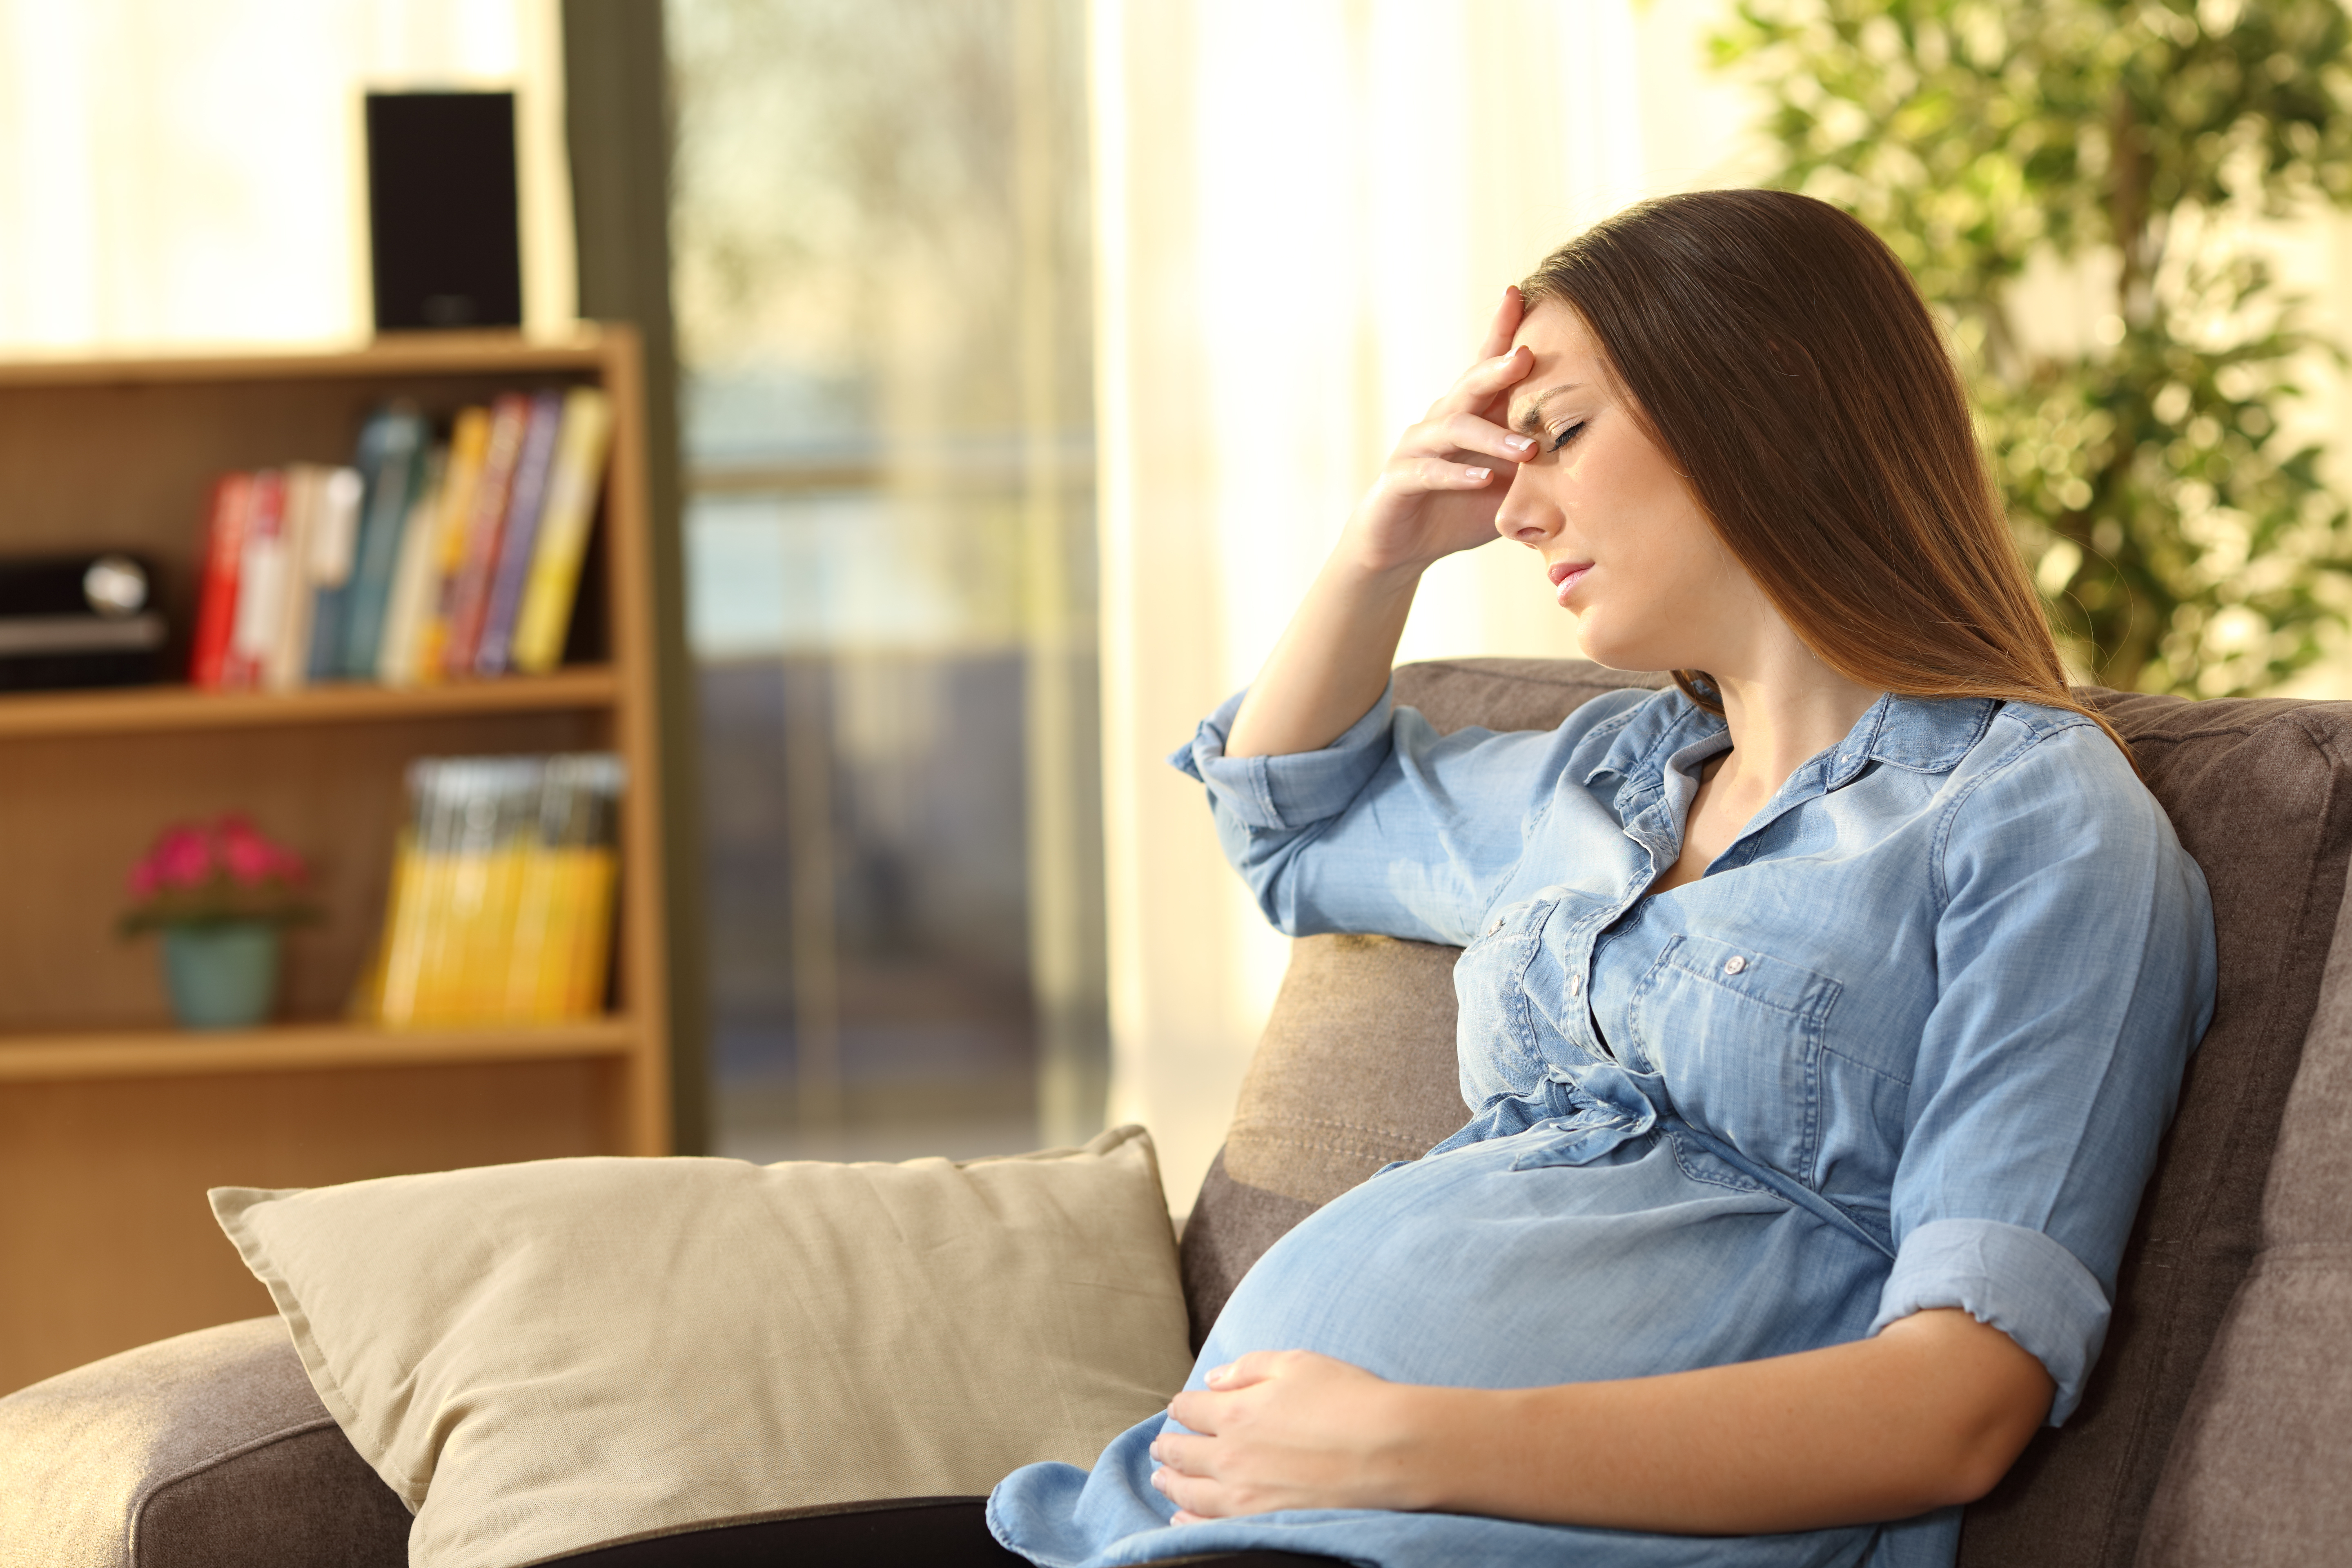 Acute Kidney Injury Increases Risk of Pregnancy Problems